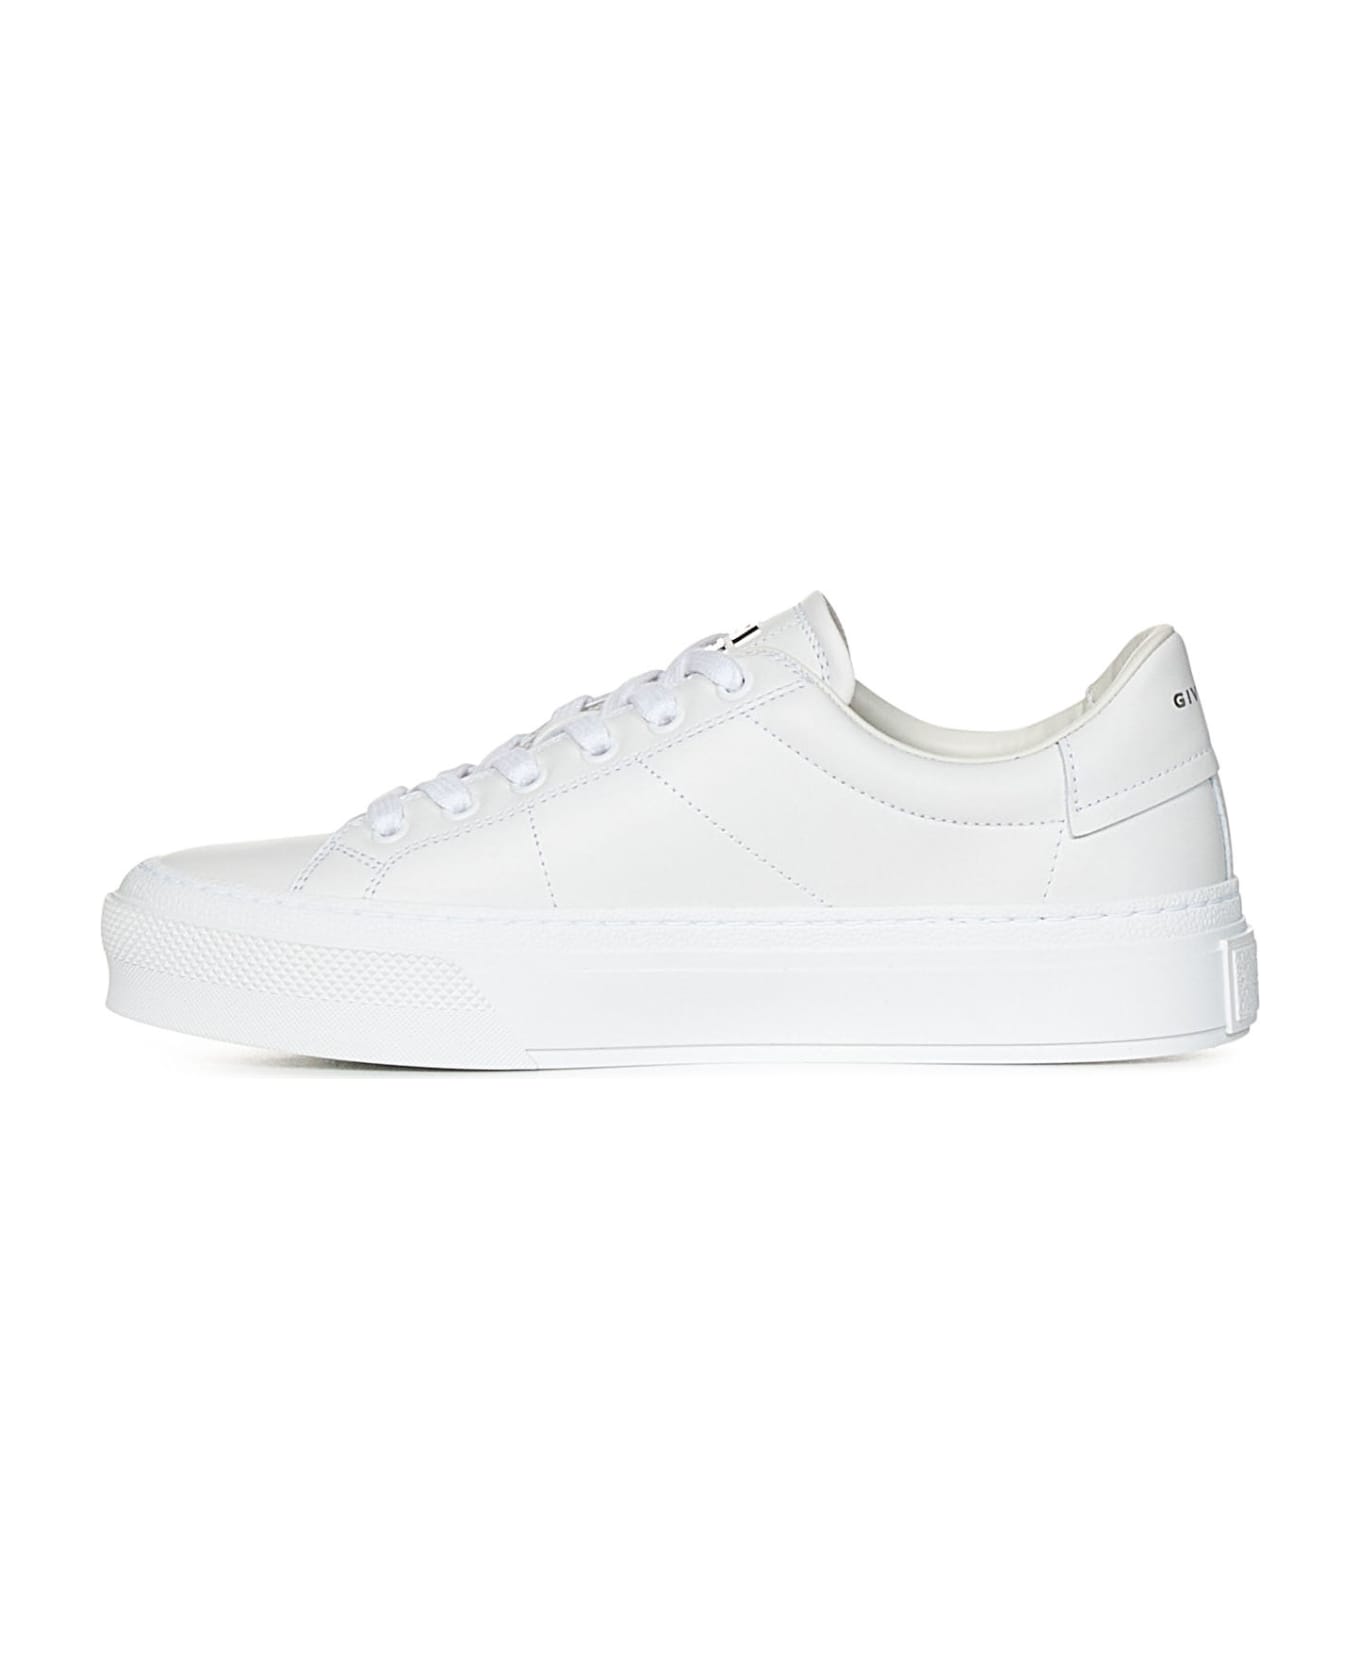 Givenchy City Sport Sneakers - white